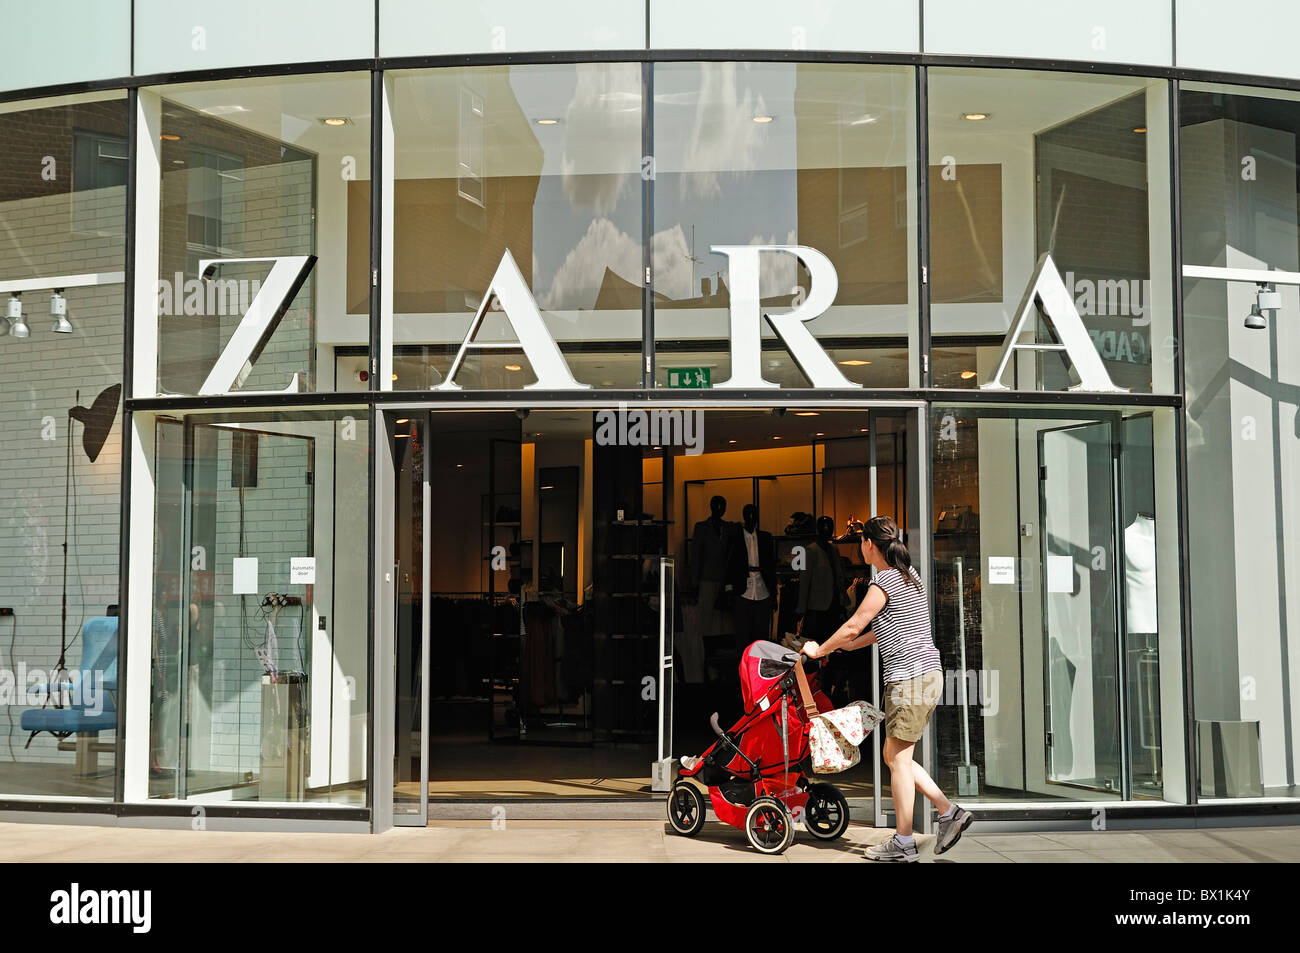 Zara store uk hi-res stock photography and images - Alamy